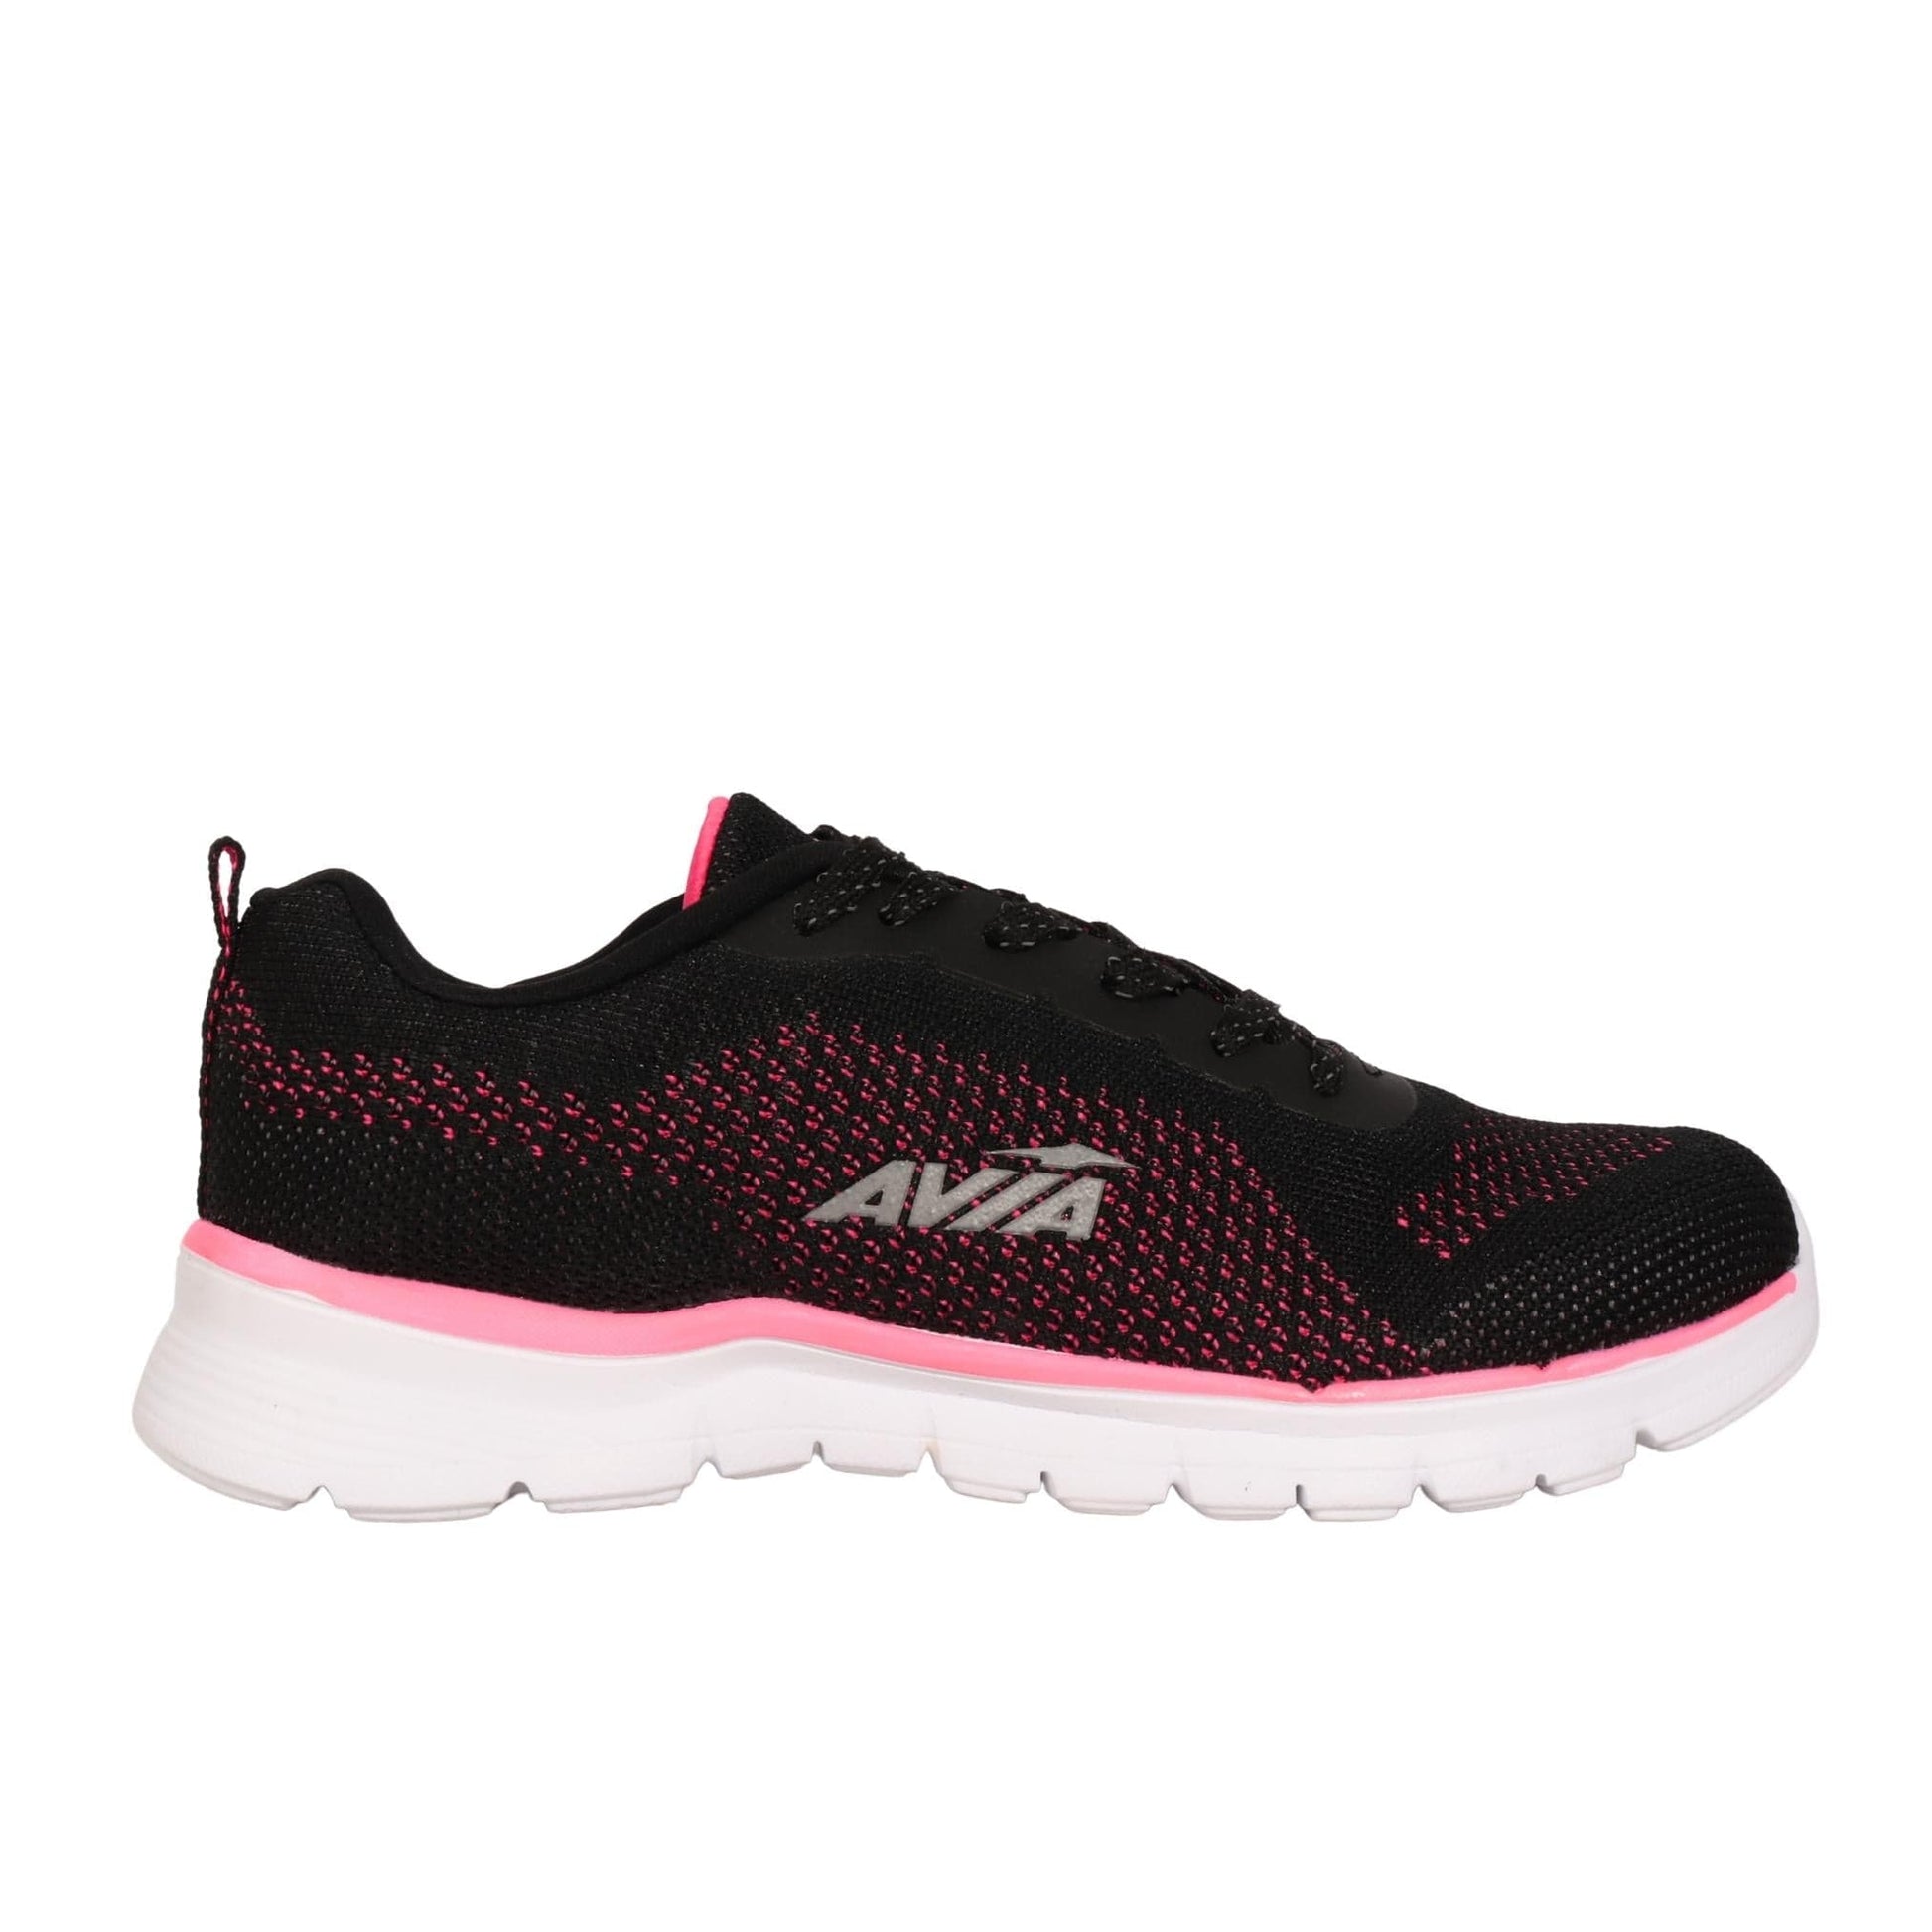 AVIA Athletic Shoes 39 / Black AVIA - Dive Lightweight Shoes